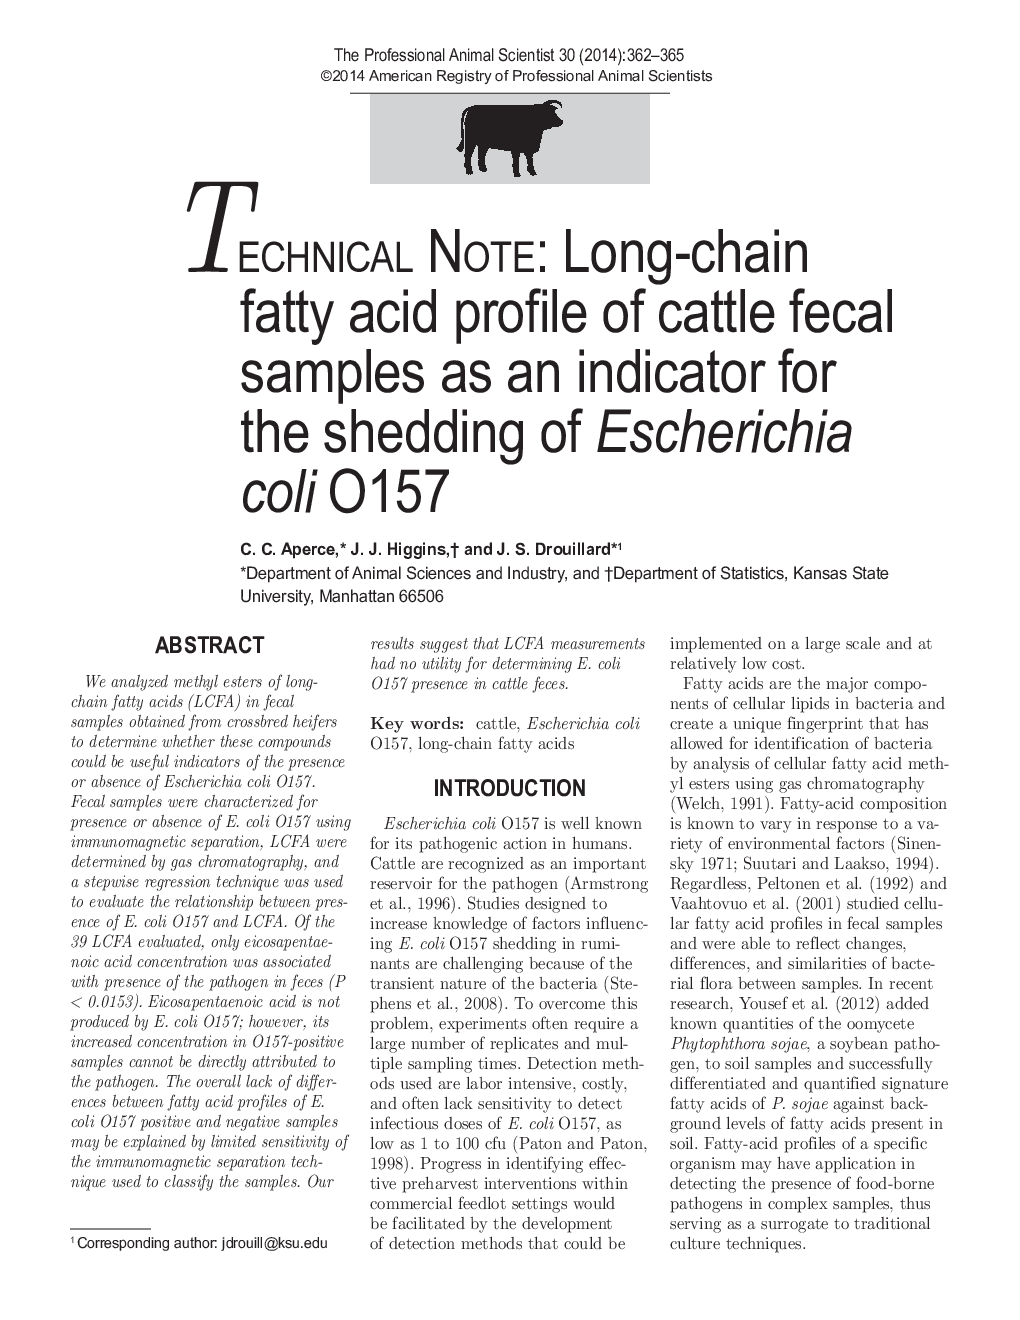 TECHNICAL NOTE: Long-chain fatty acid profile of cattle fecal samples as an indicator for the shedding of Escherichia coli O157